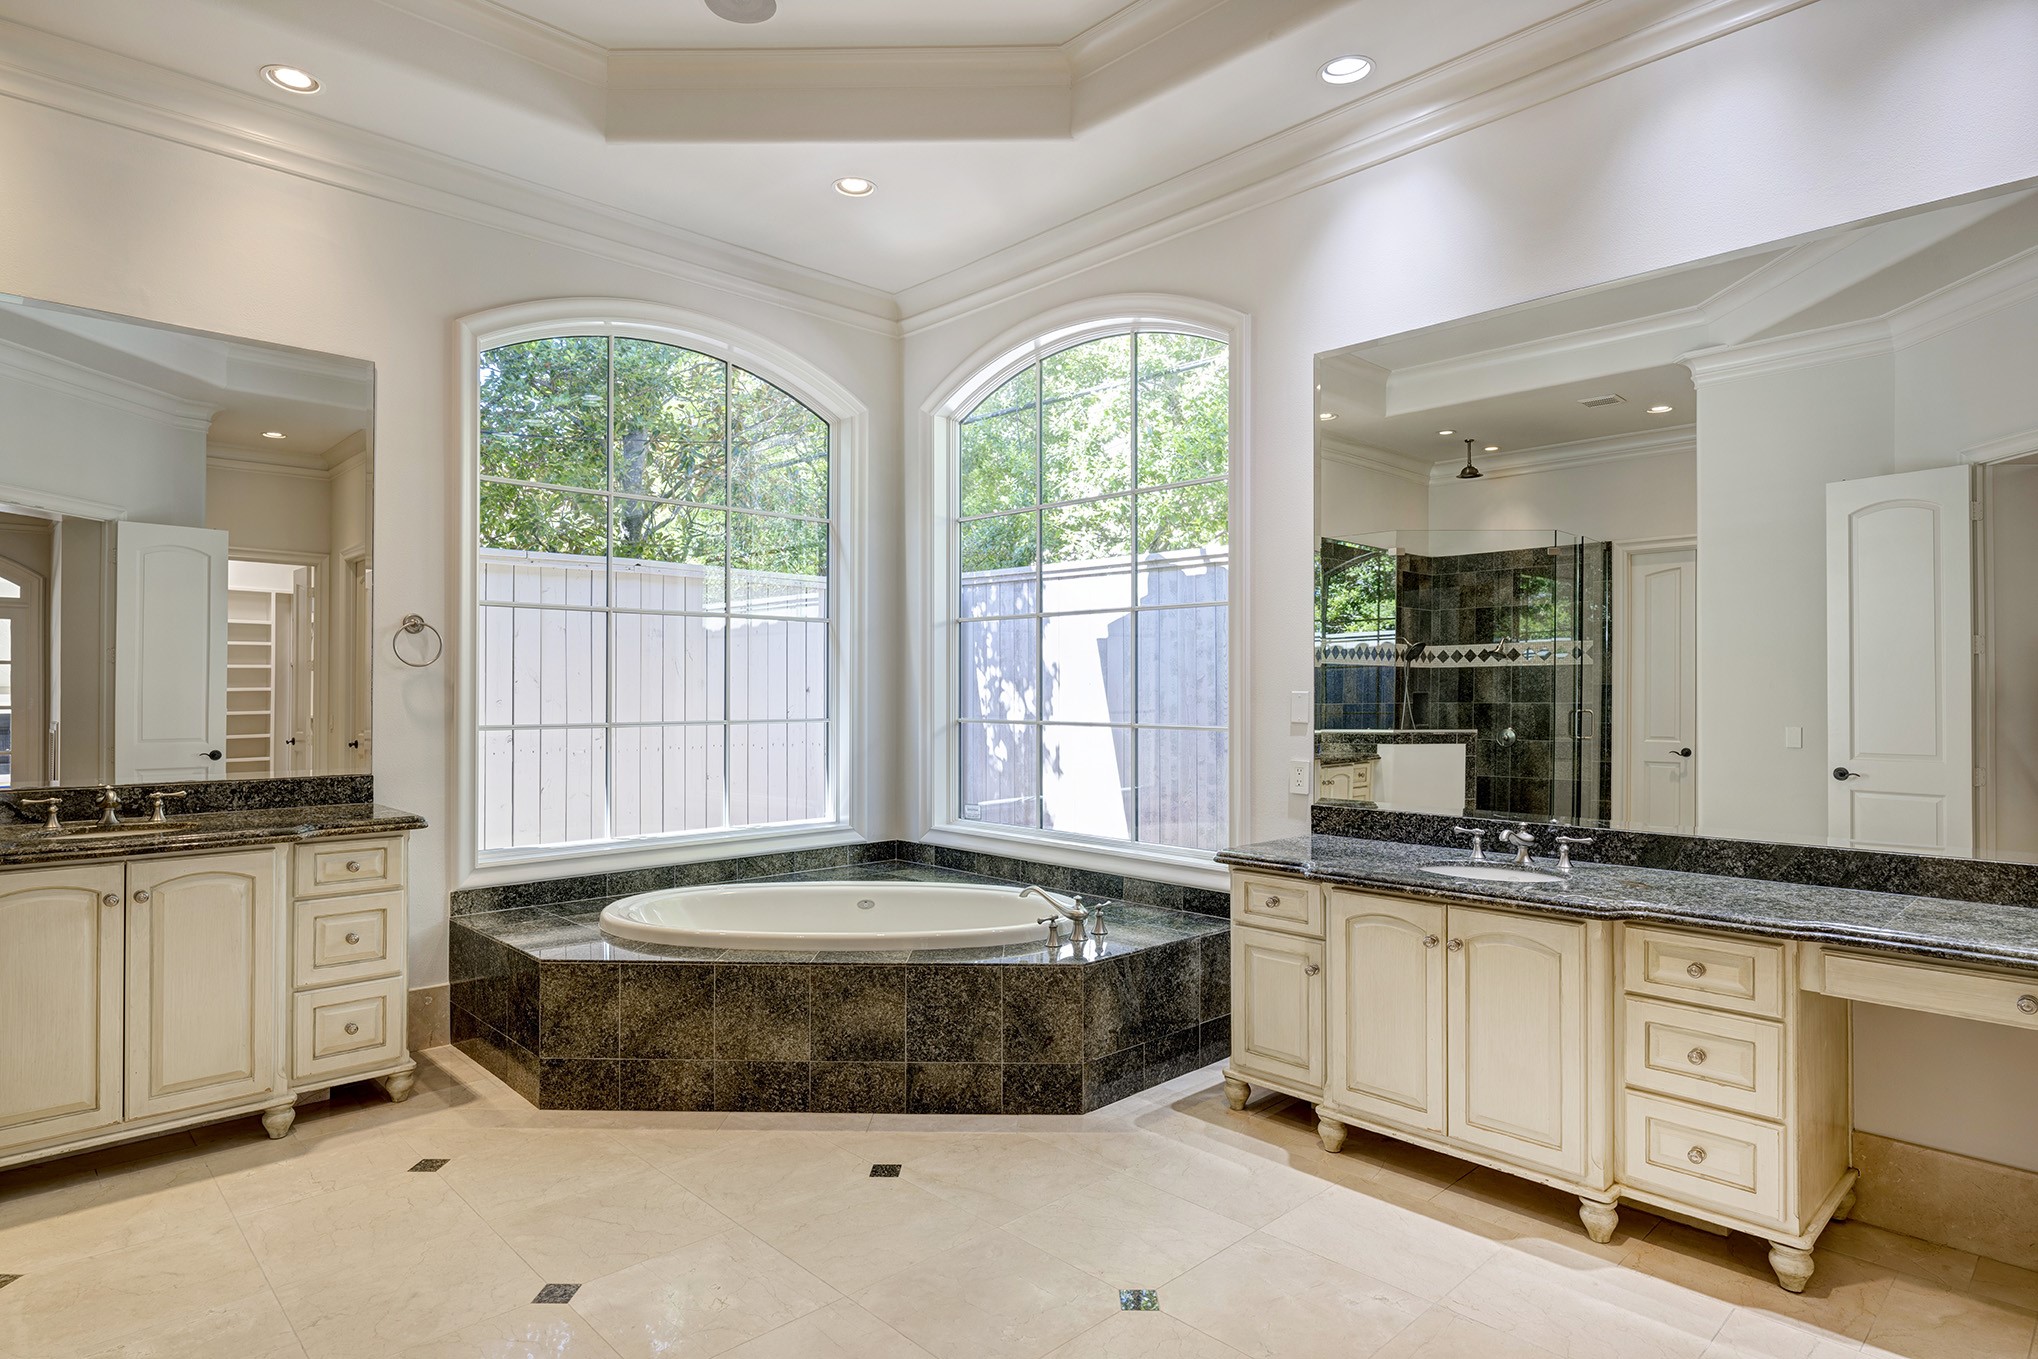 Primary bath with double vanities, soaking tub, separate glass shower and two walk-in closets.